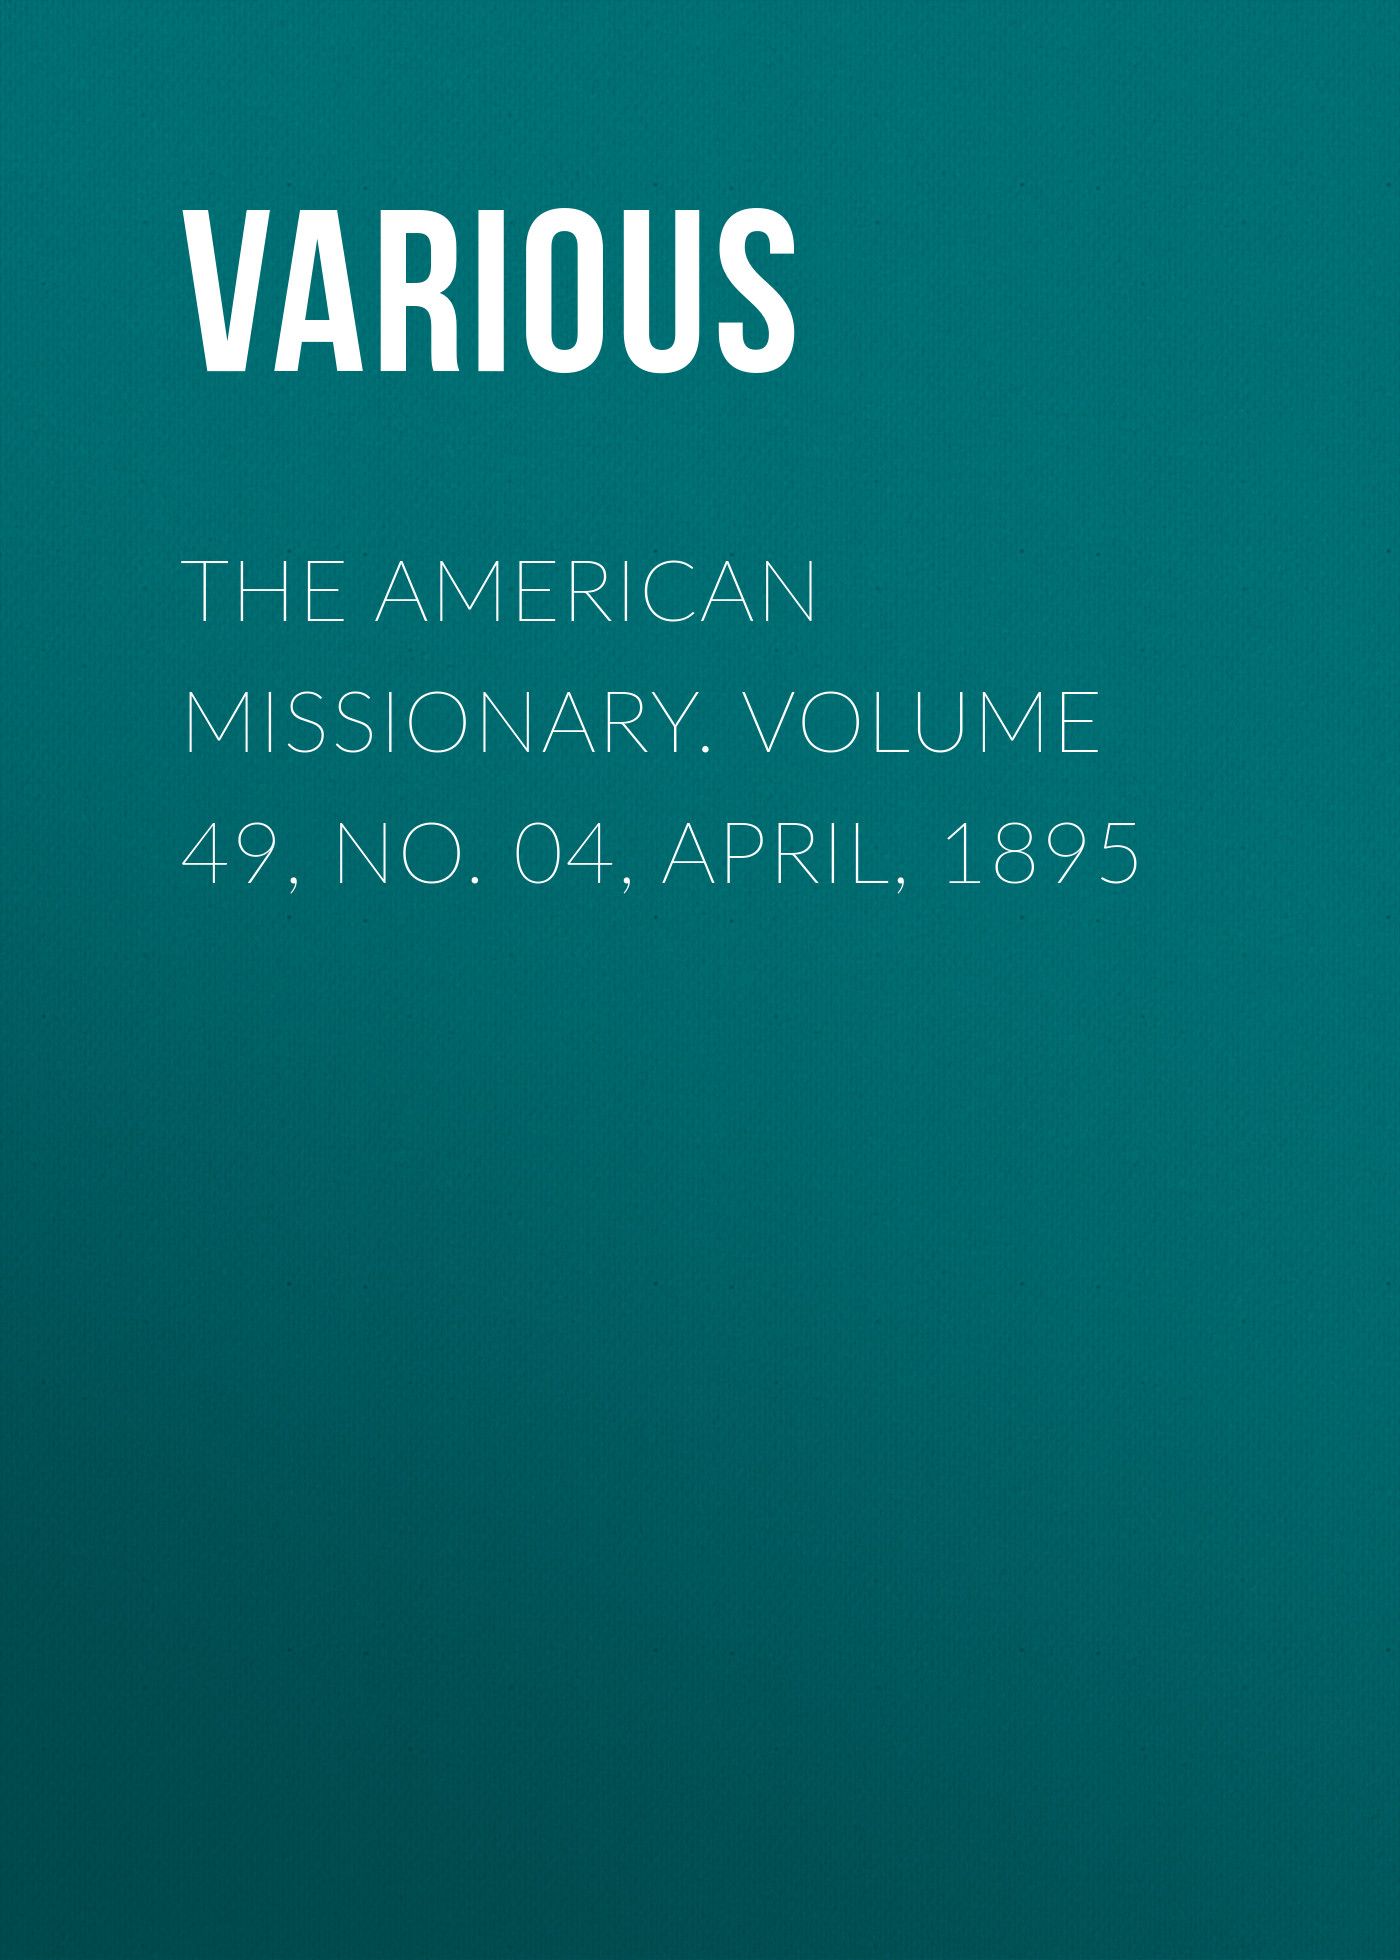 The American Missionary. Volume 49, No. 04, April, 1895